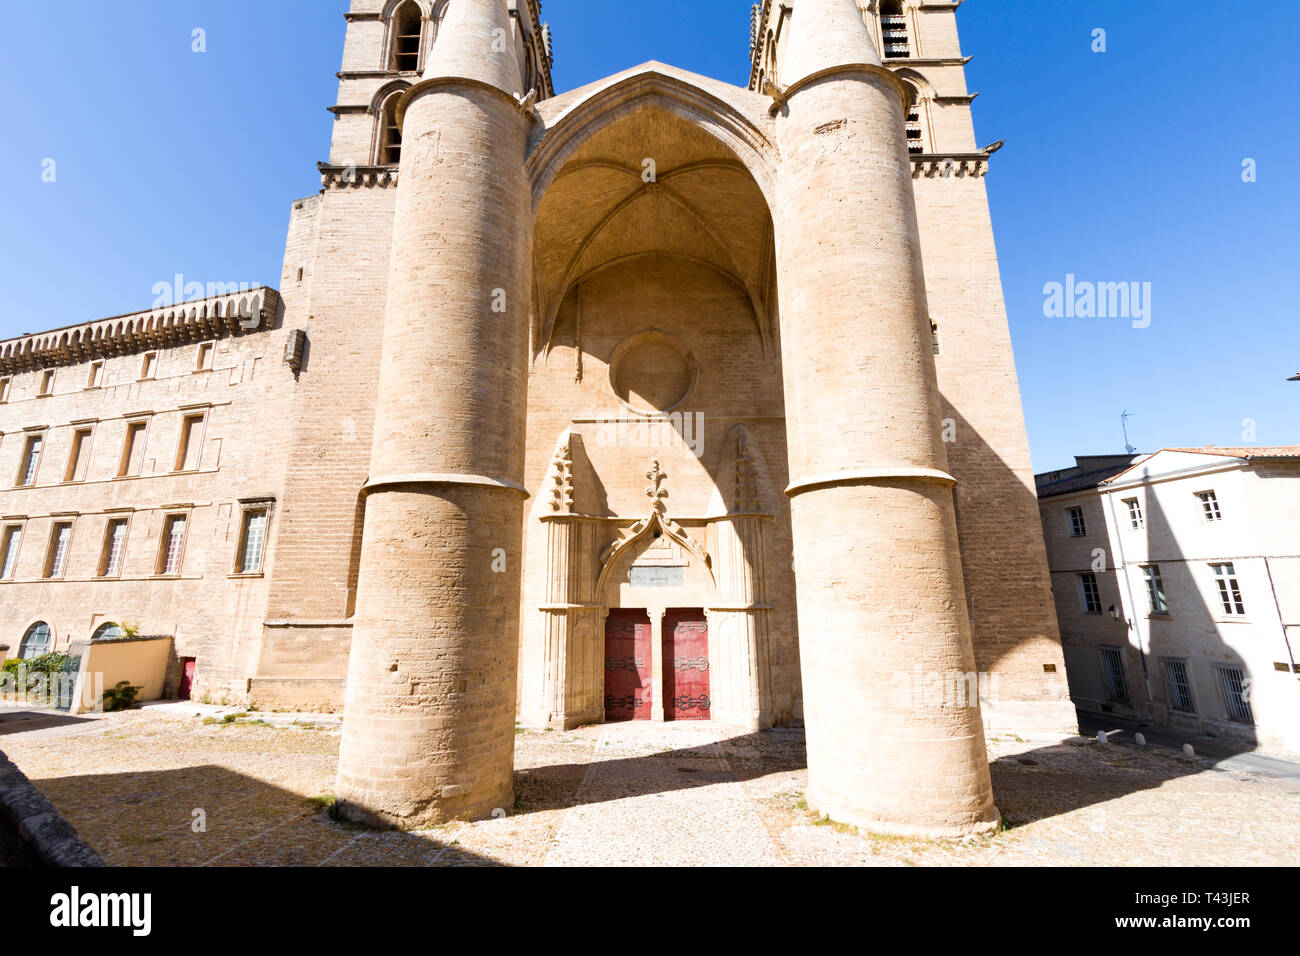 Montpellier Cathedral is a Roman Catholic church located in the city of Montpellier, France. Stock Photo